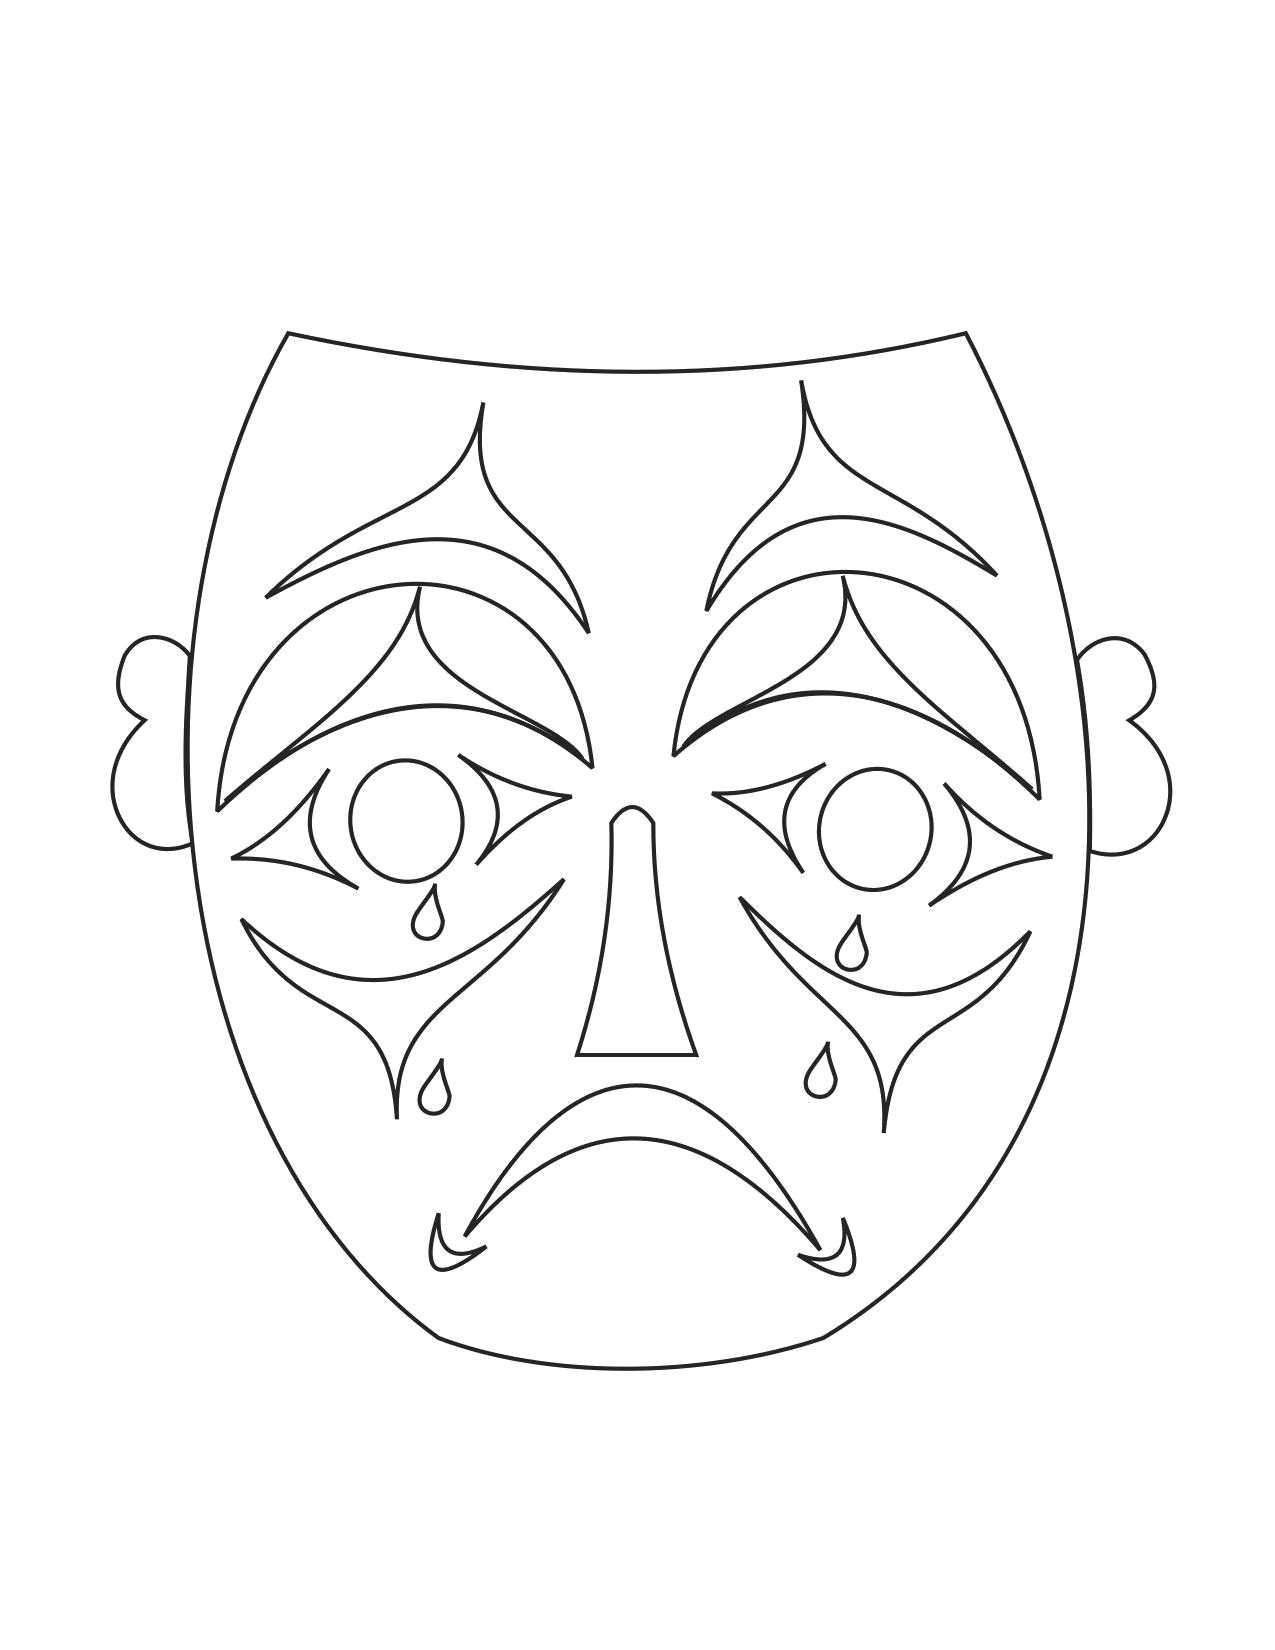 Coloring Sad mask with tears. Category Masks . Tags:  mask.